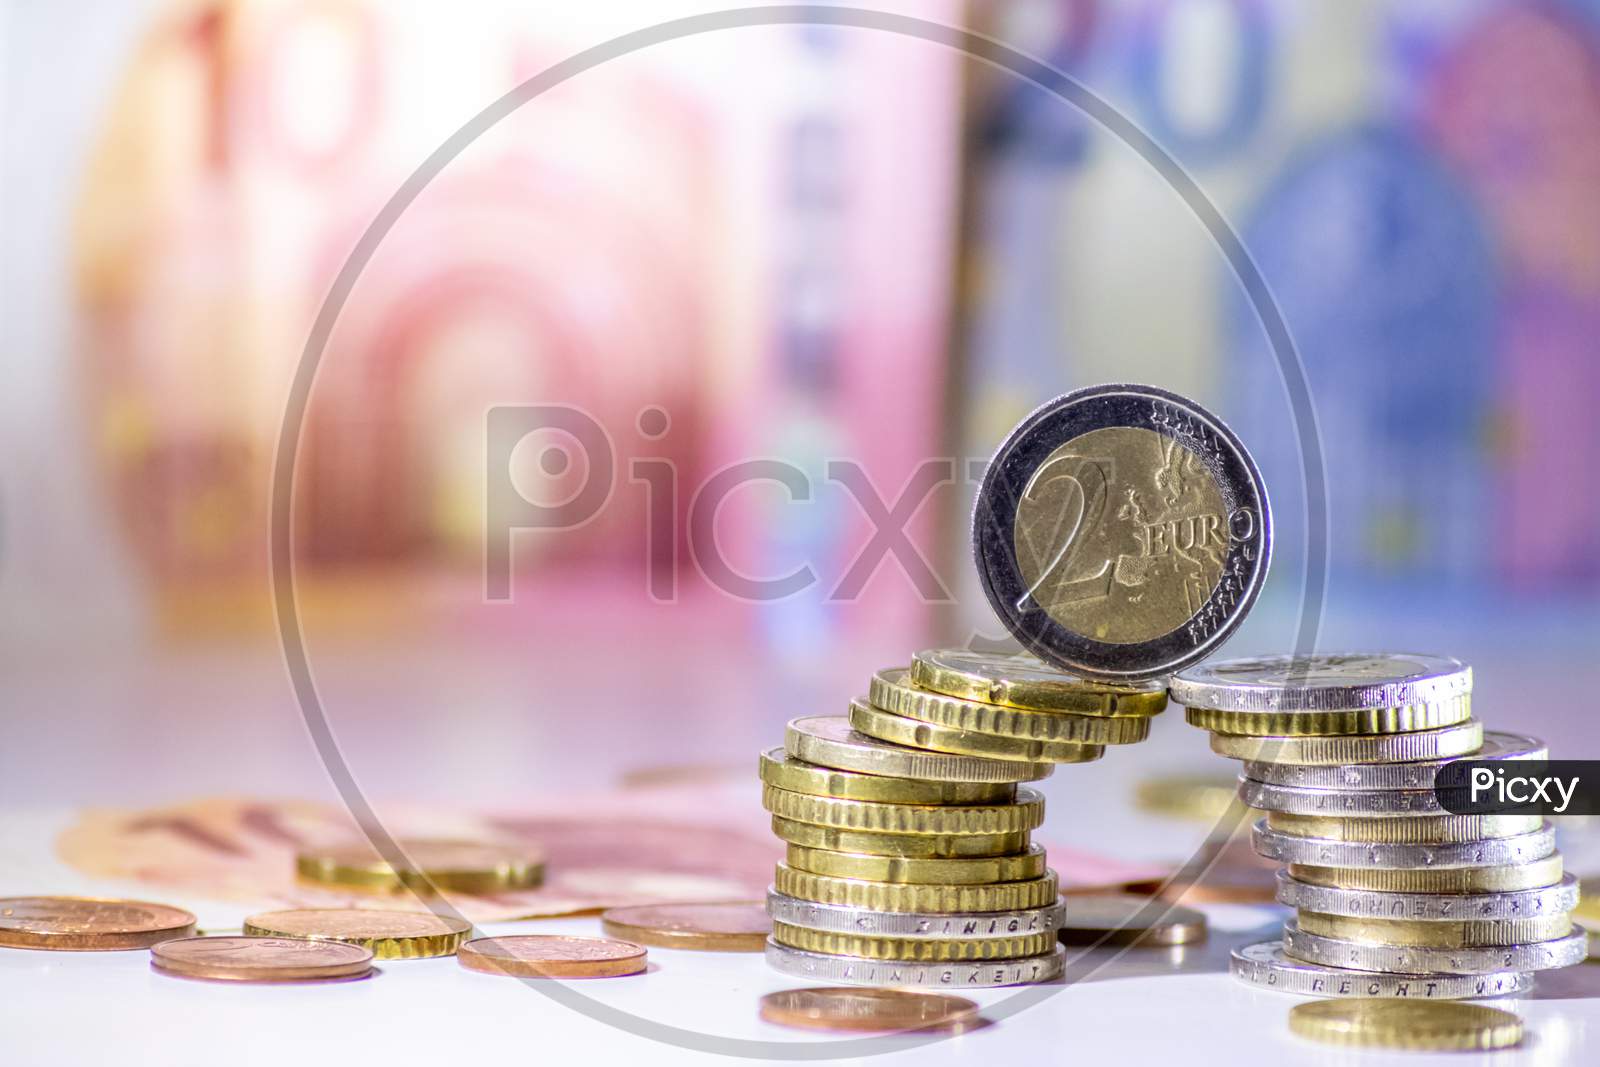 Bunch of european money with coins and bank notes show international finance with euro and europe, financial trade with a 2 euro coin and different euro coins and euro bank notes for financial success